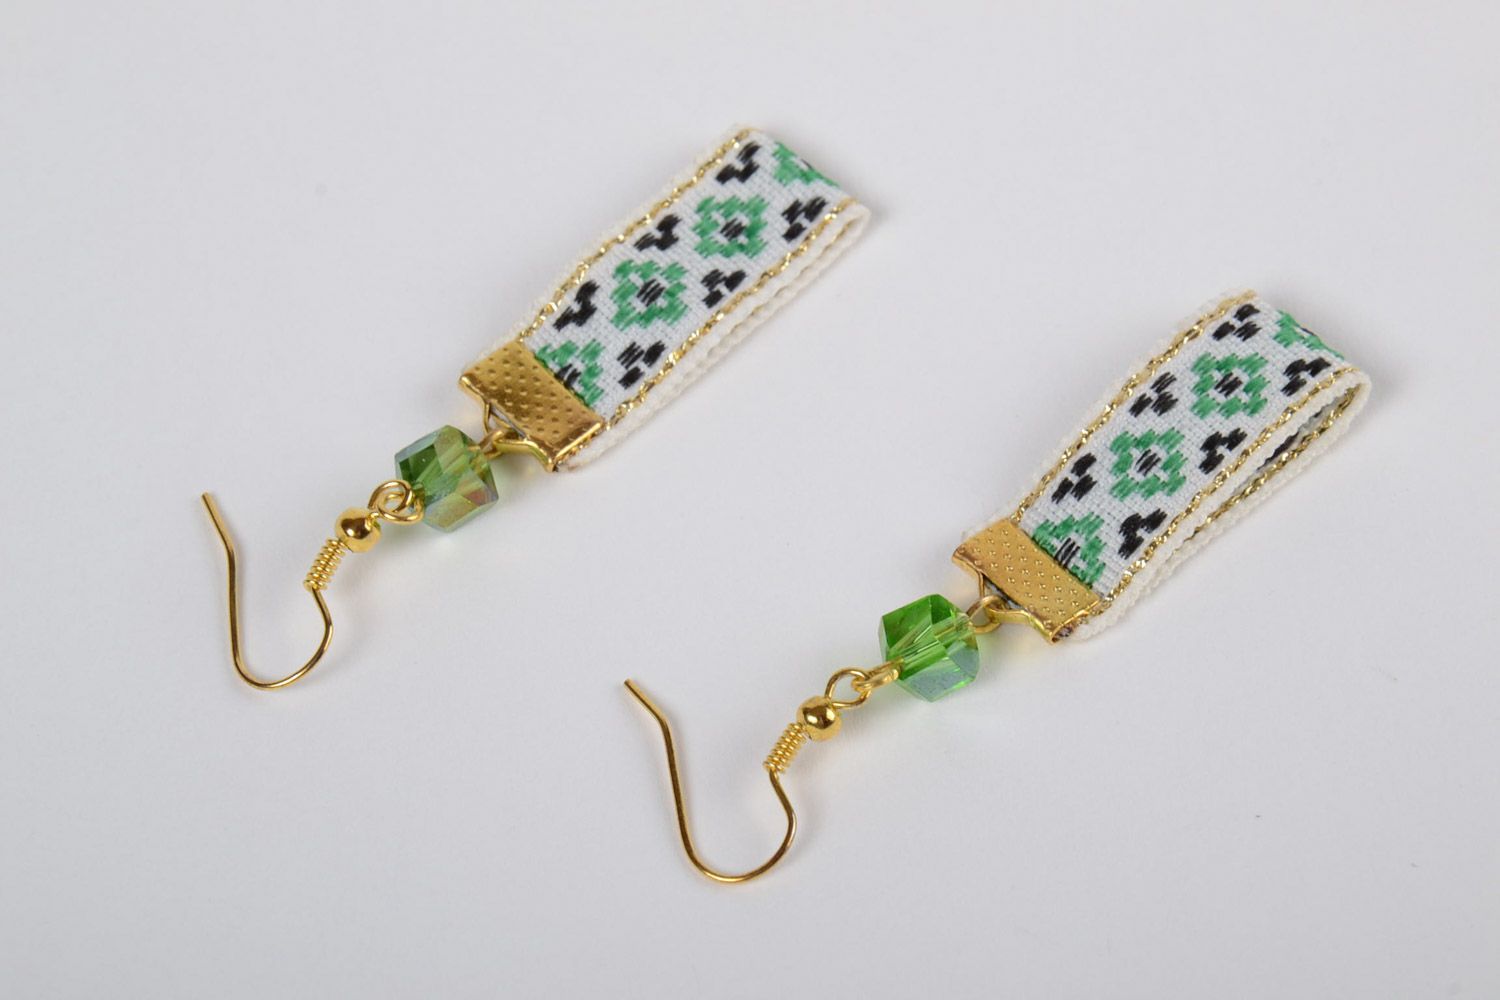 Handmade lace earrings with beads in ethnic Ukrainian style for women photo 2